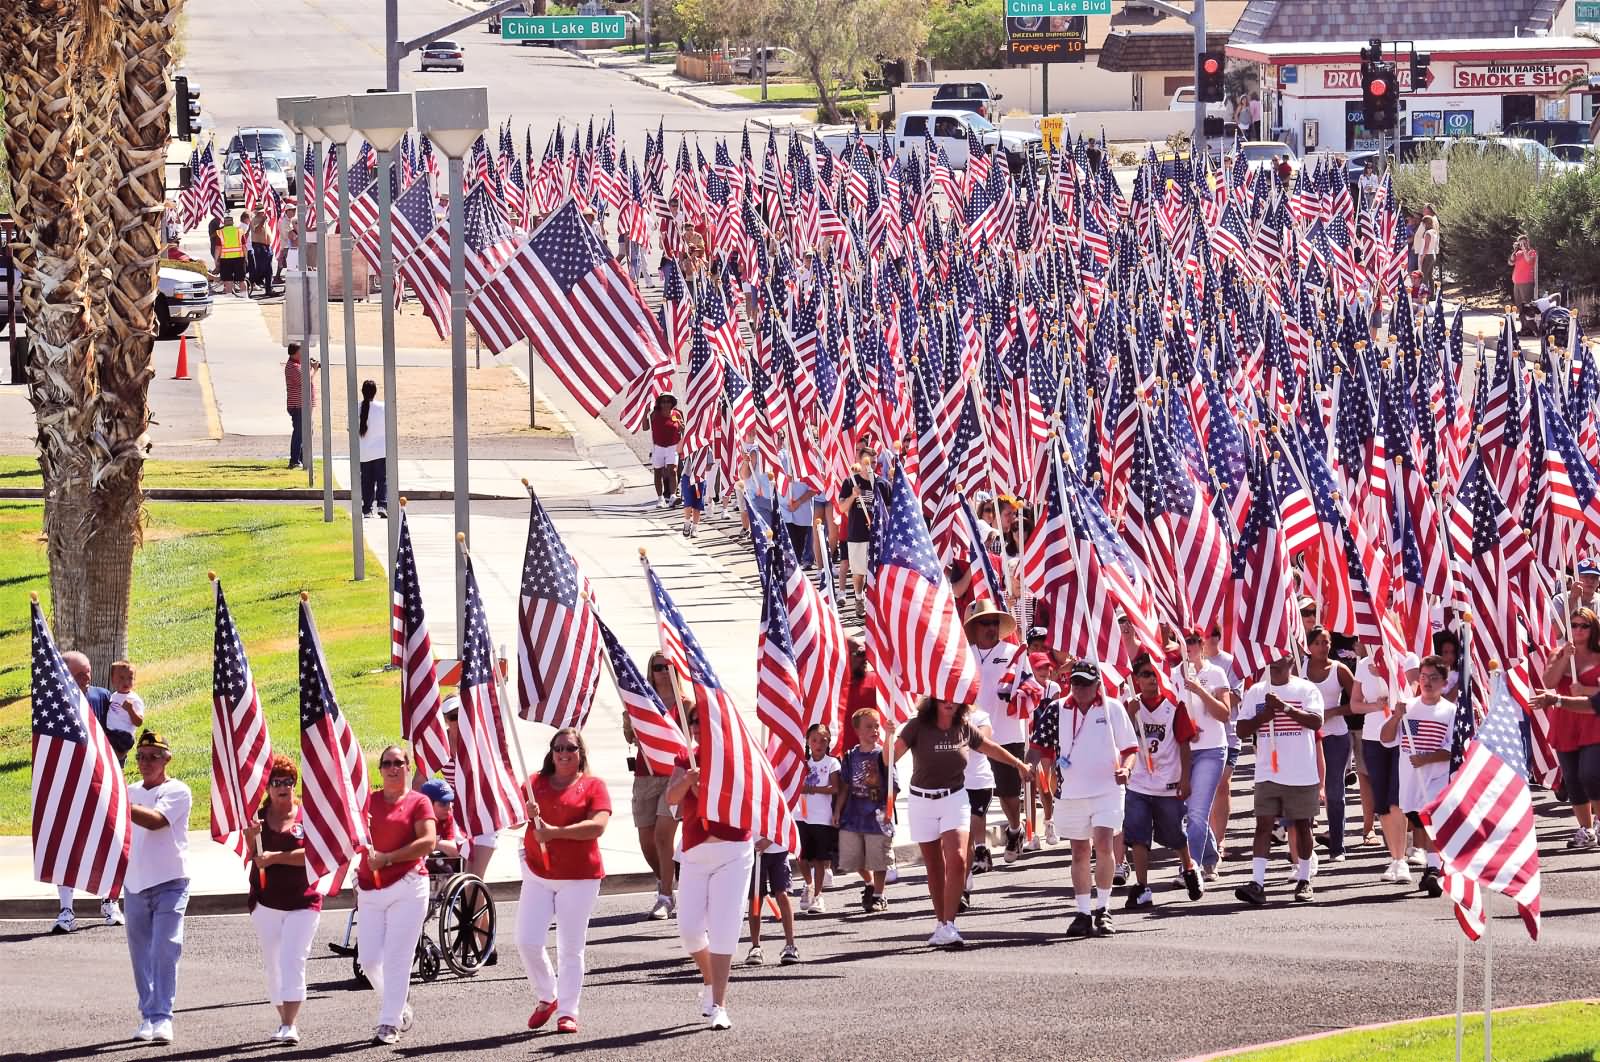 Large Number Of People With American Flags Participating In Flag Day Parade